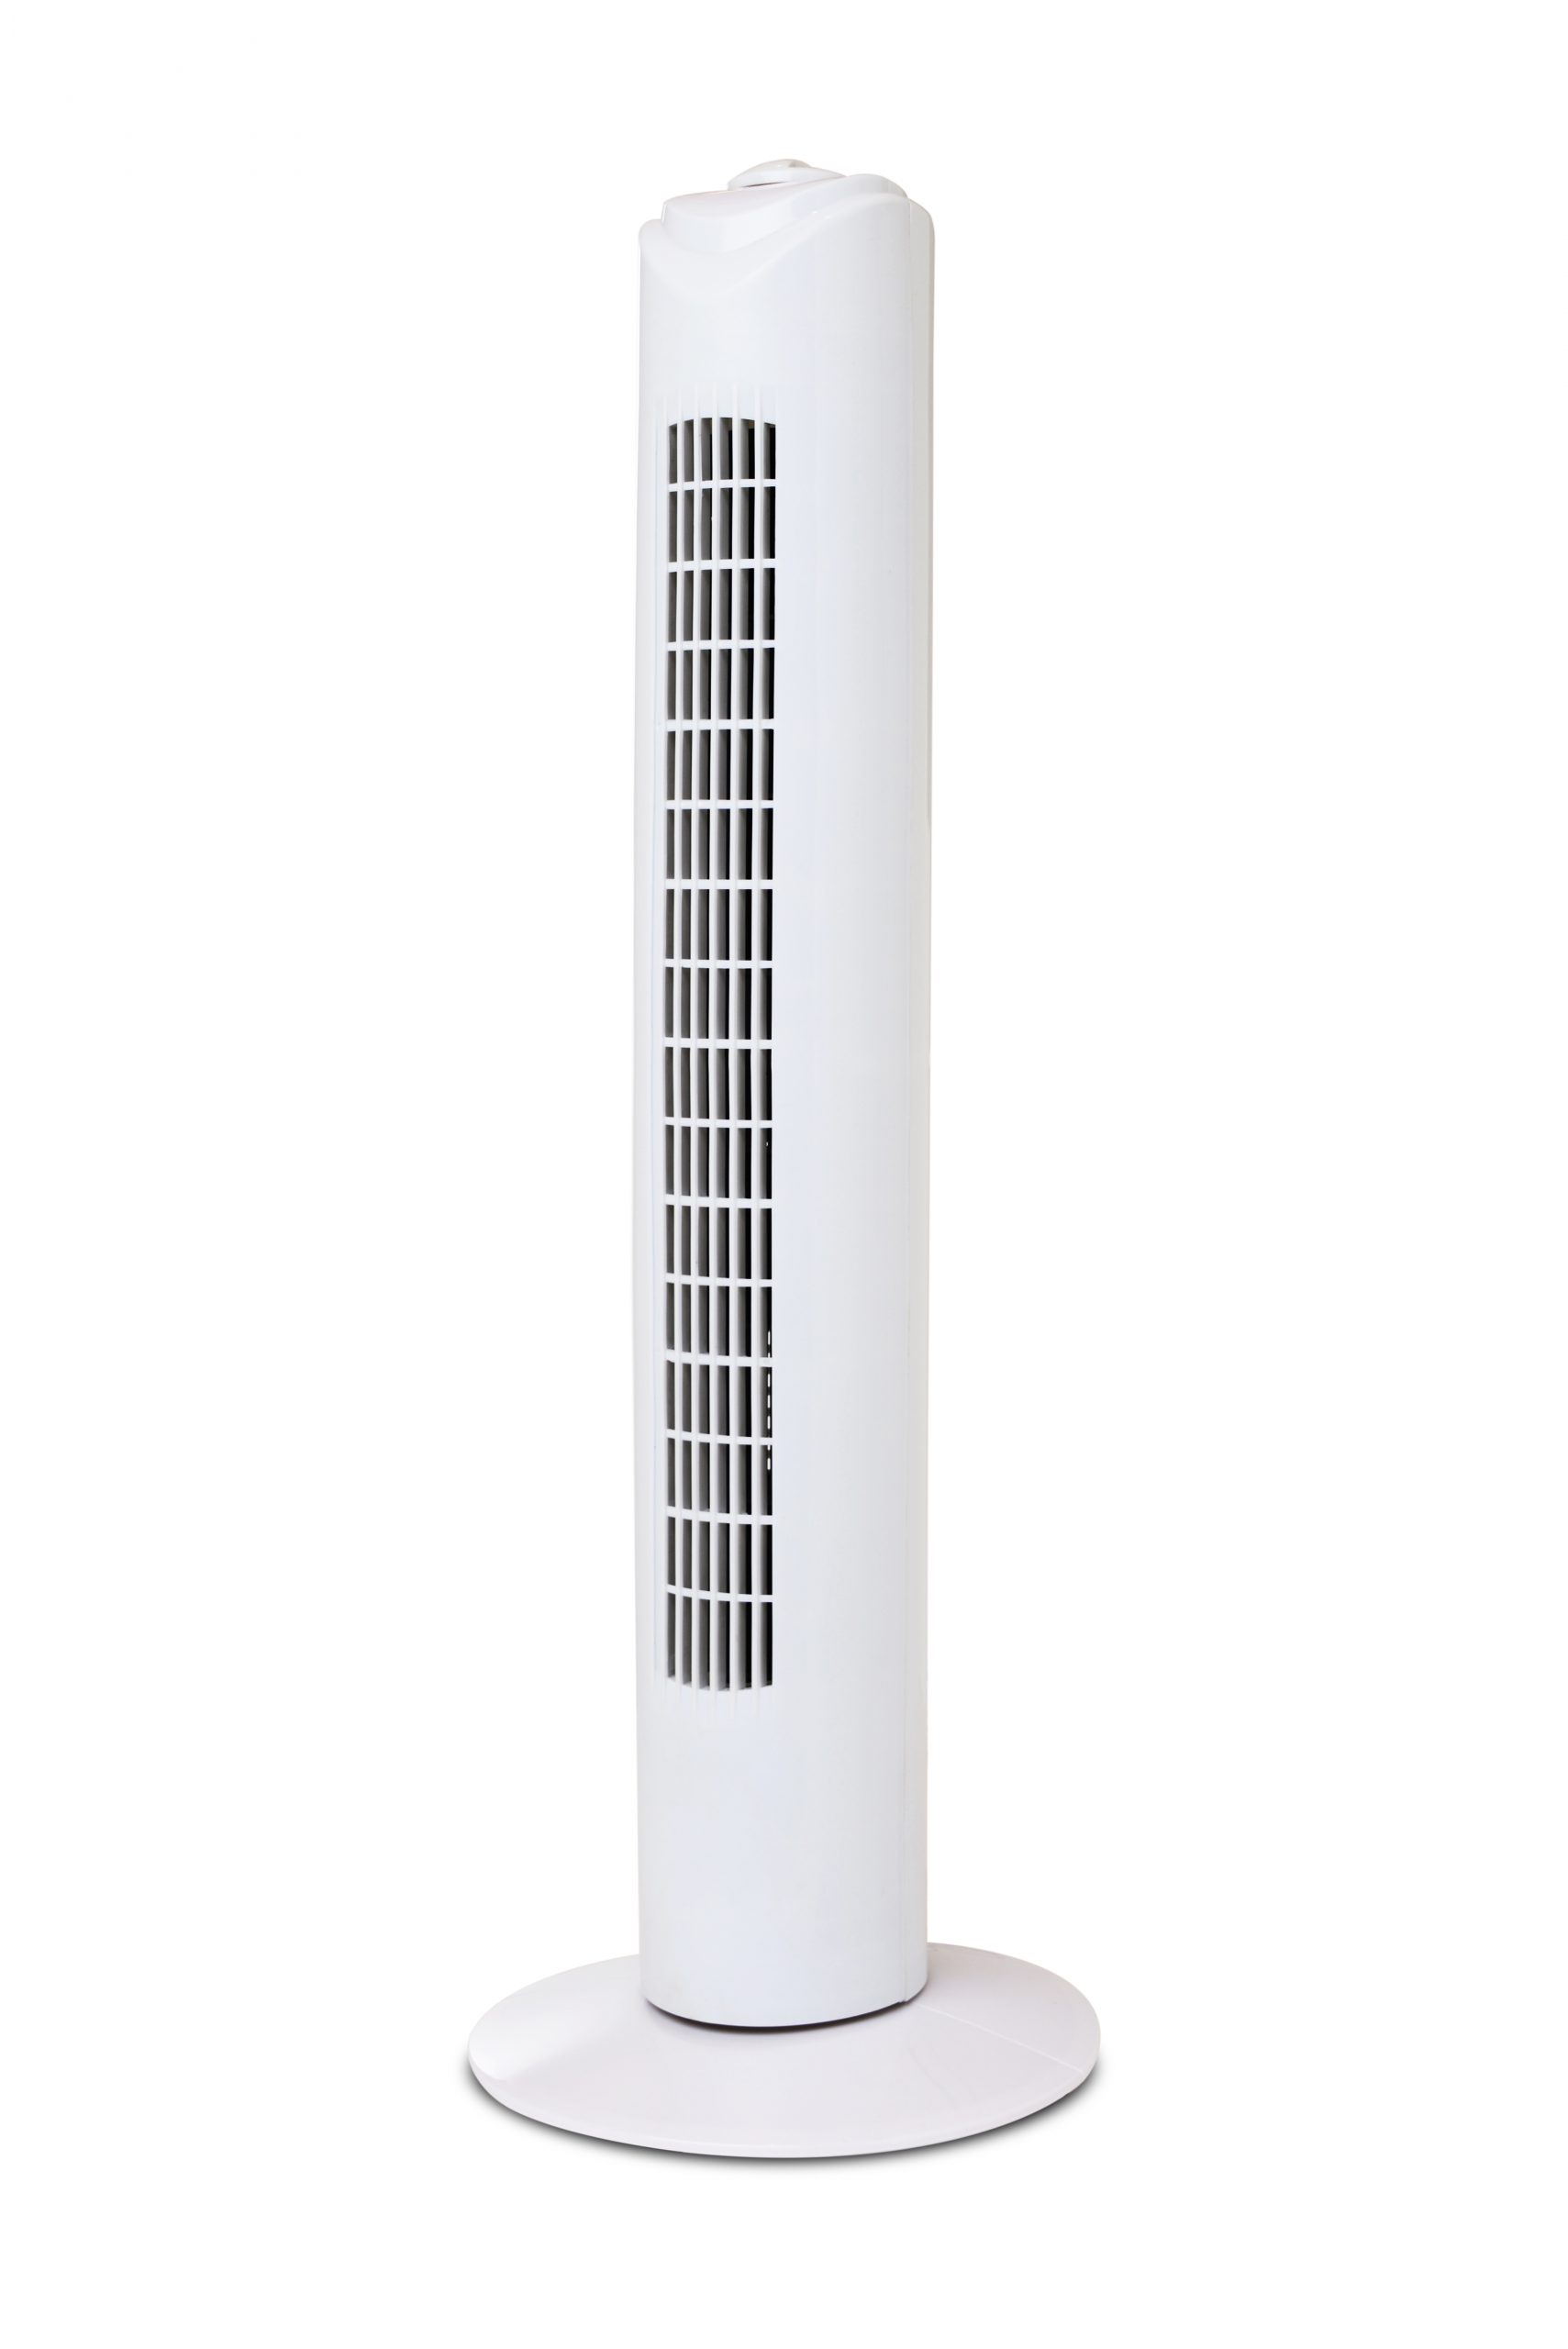 Gctf150 81cm Tower Fan Goldair for sizing 4016 X 6016